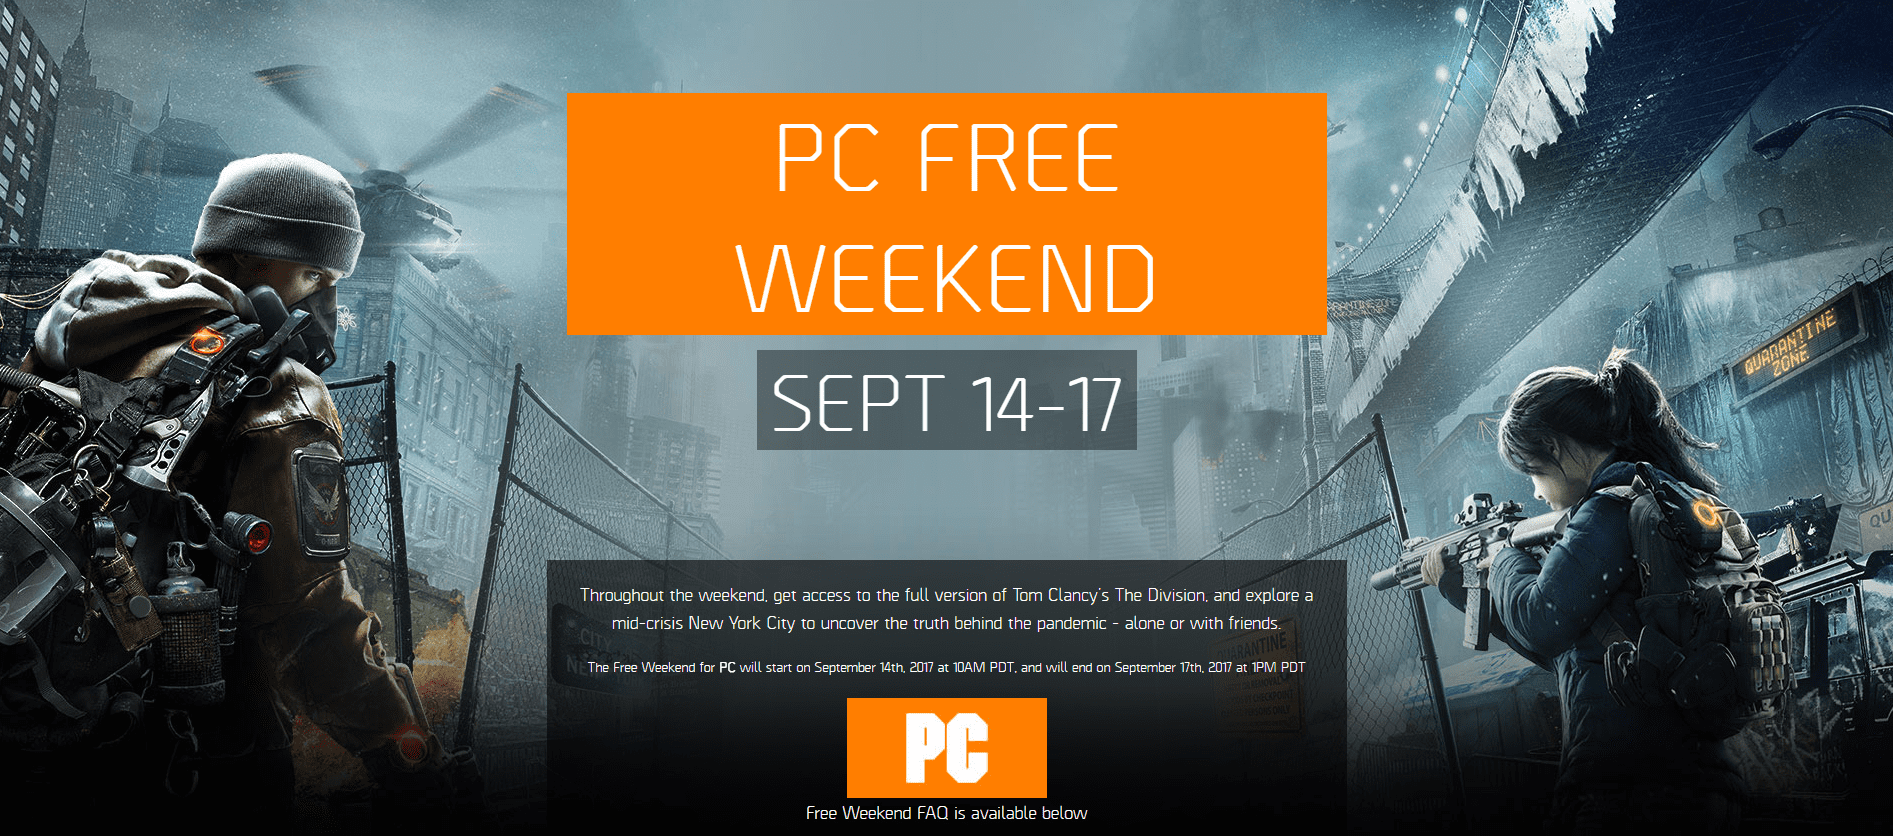 Tom Clancy’s The Division Announces Free Weekend For PC Players